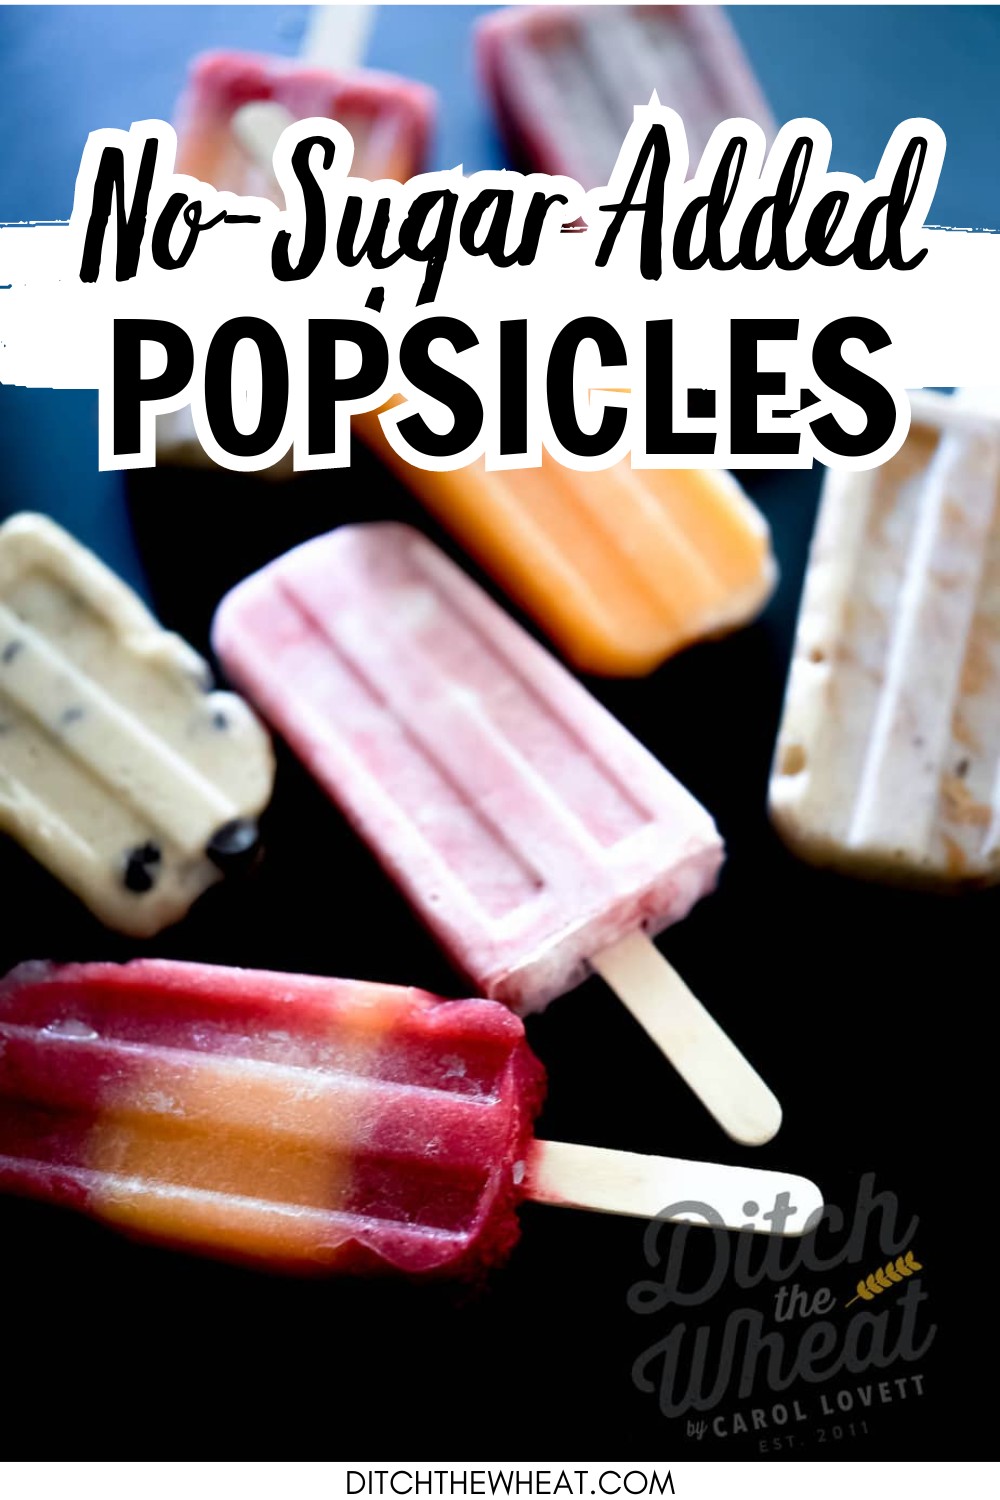 An image of 7 no-sugar added popsicles on a black background.